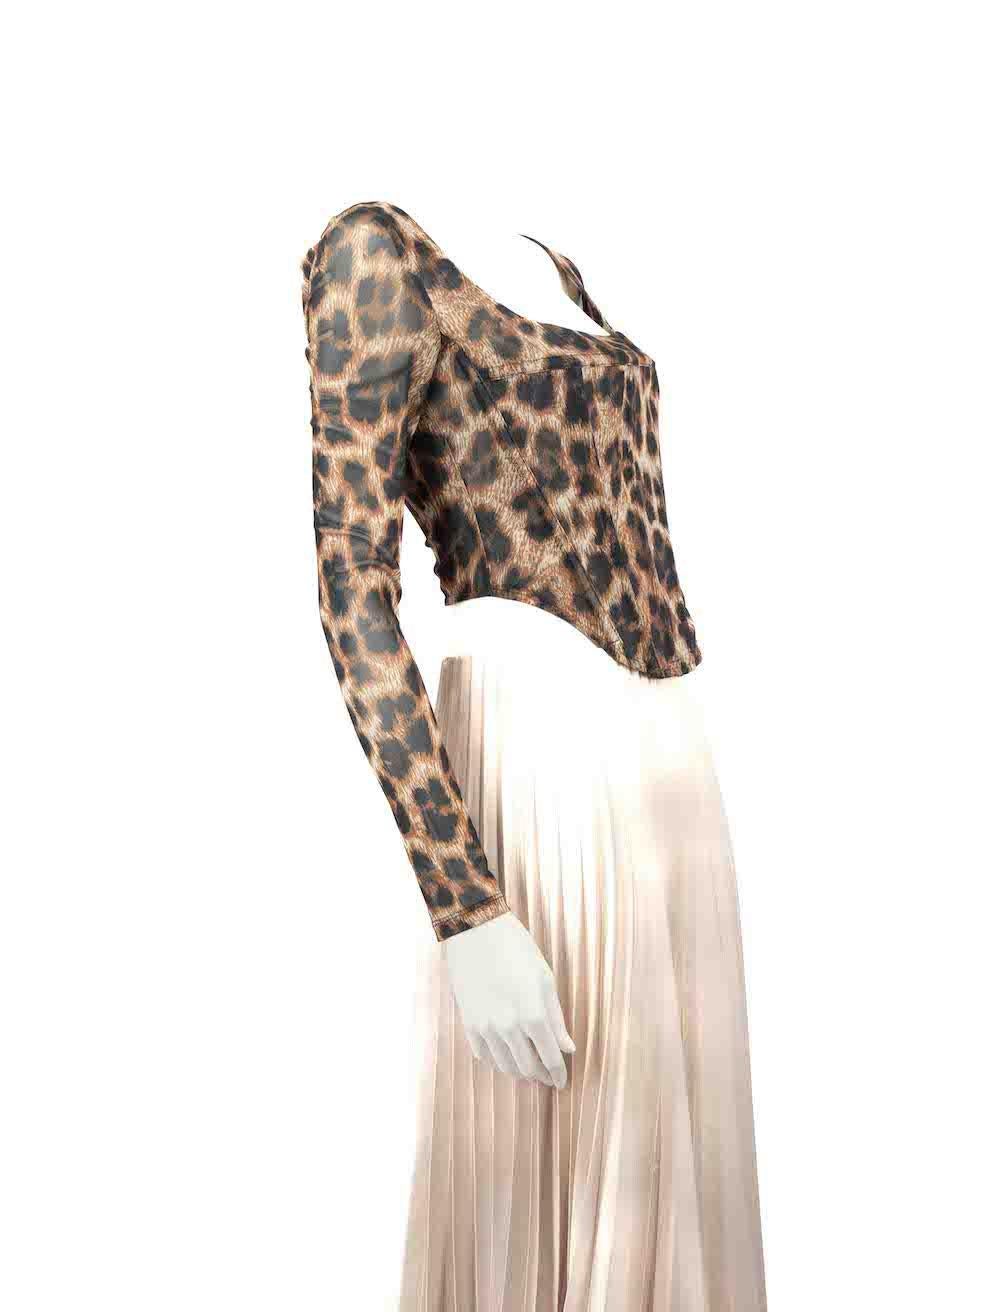 CONDITION is Never worn, with tags. No visible wear to corset top is evident on this new Miaou designer resale item.
 
 
 
 Details
 
 
 Model: Maude Corset
 
 Brown
 
 Polyester
 
 Corset top
 
 Leopard print
 
 Sheer
 
 Long sleeves
 
 Boned
 
